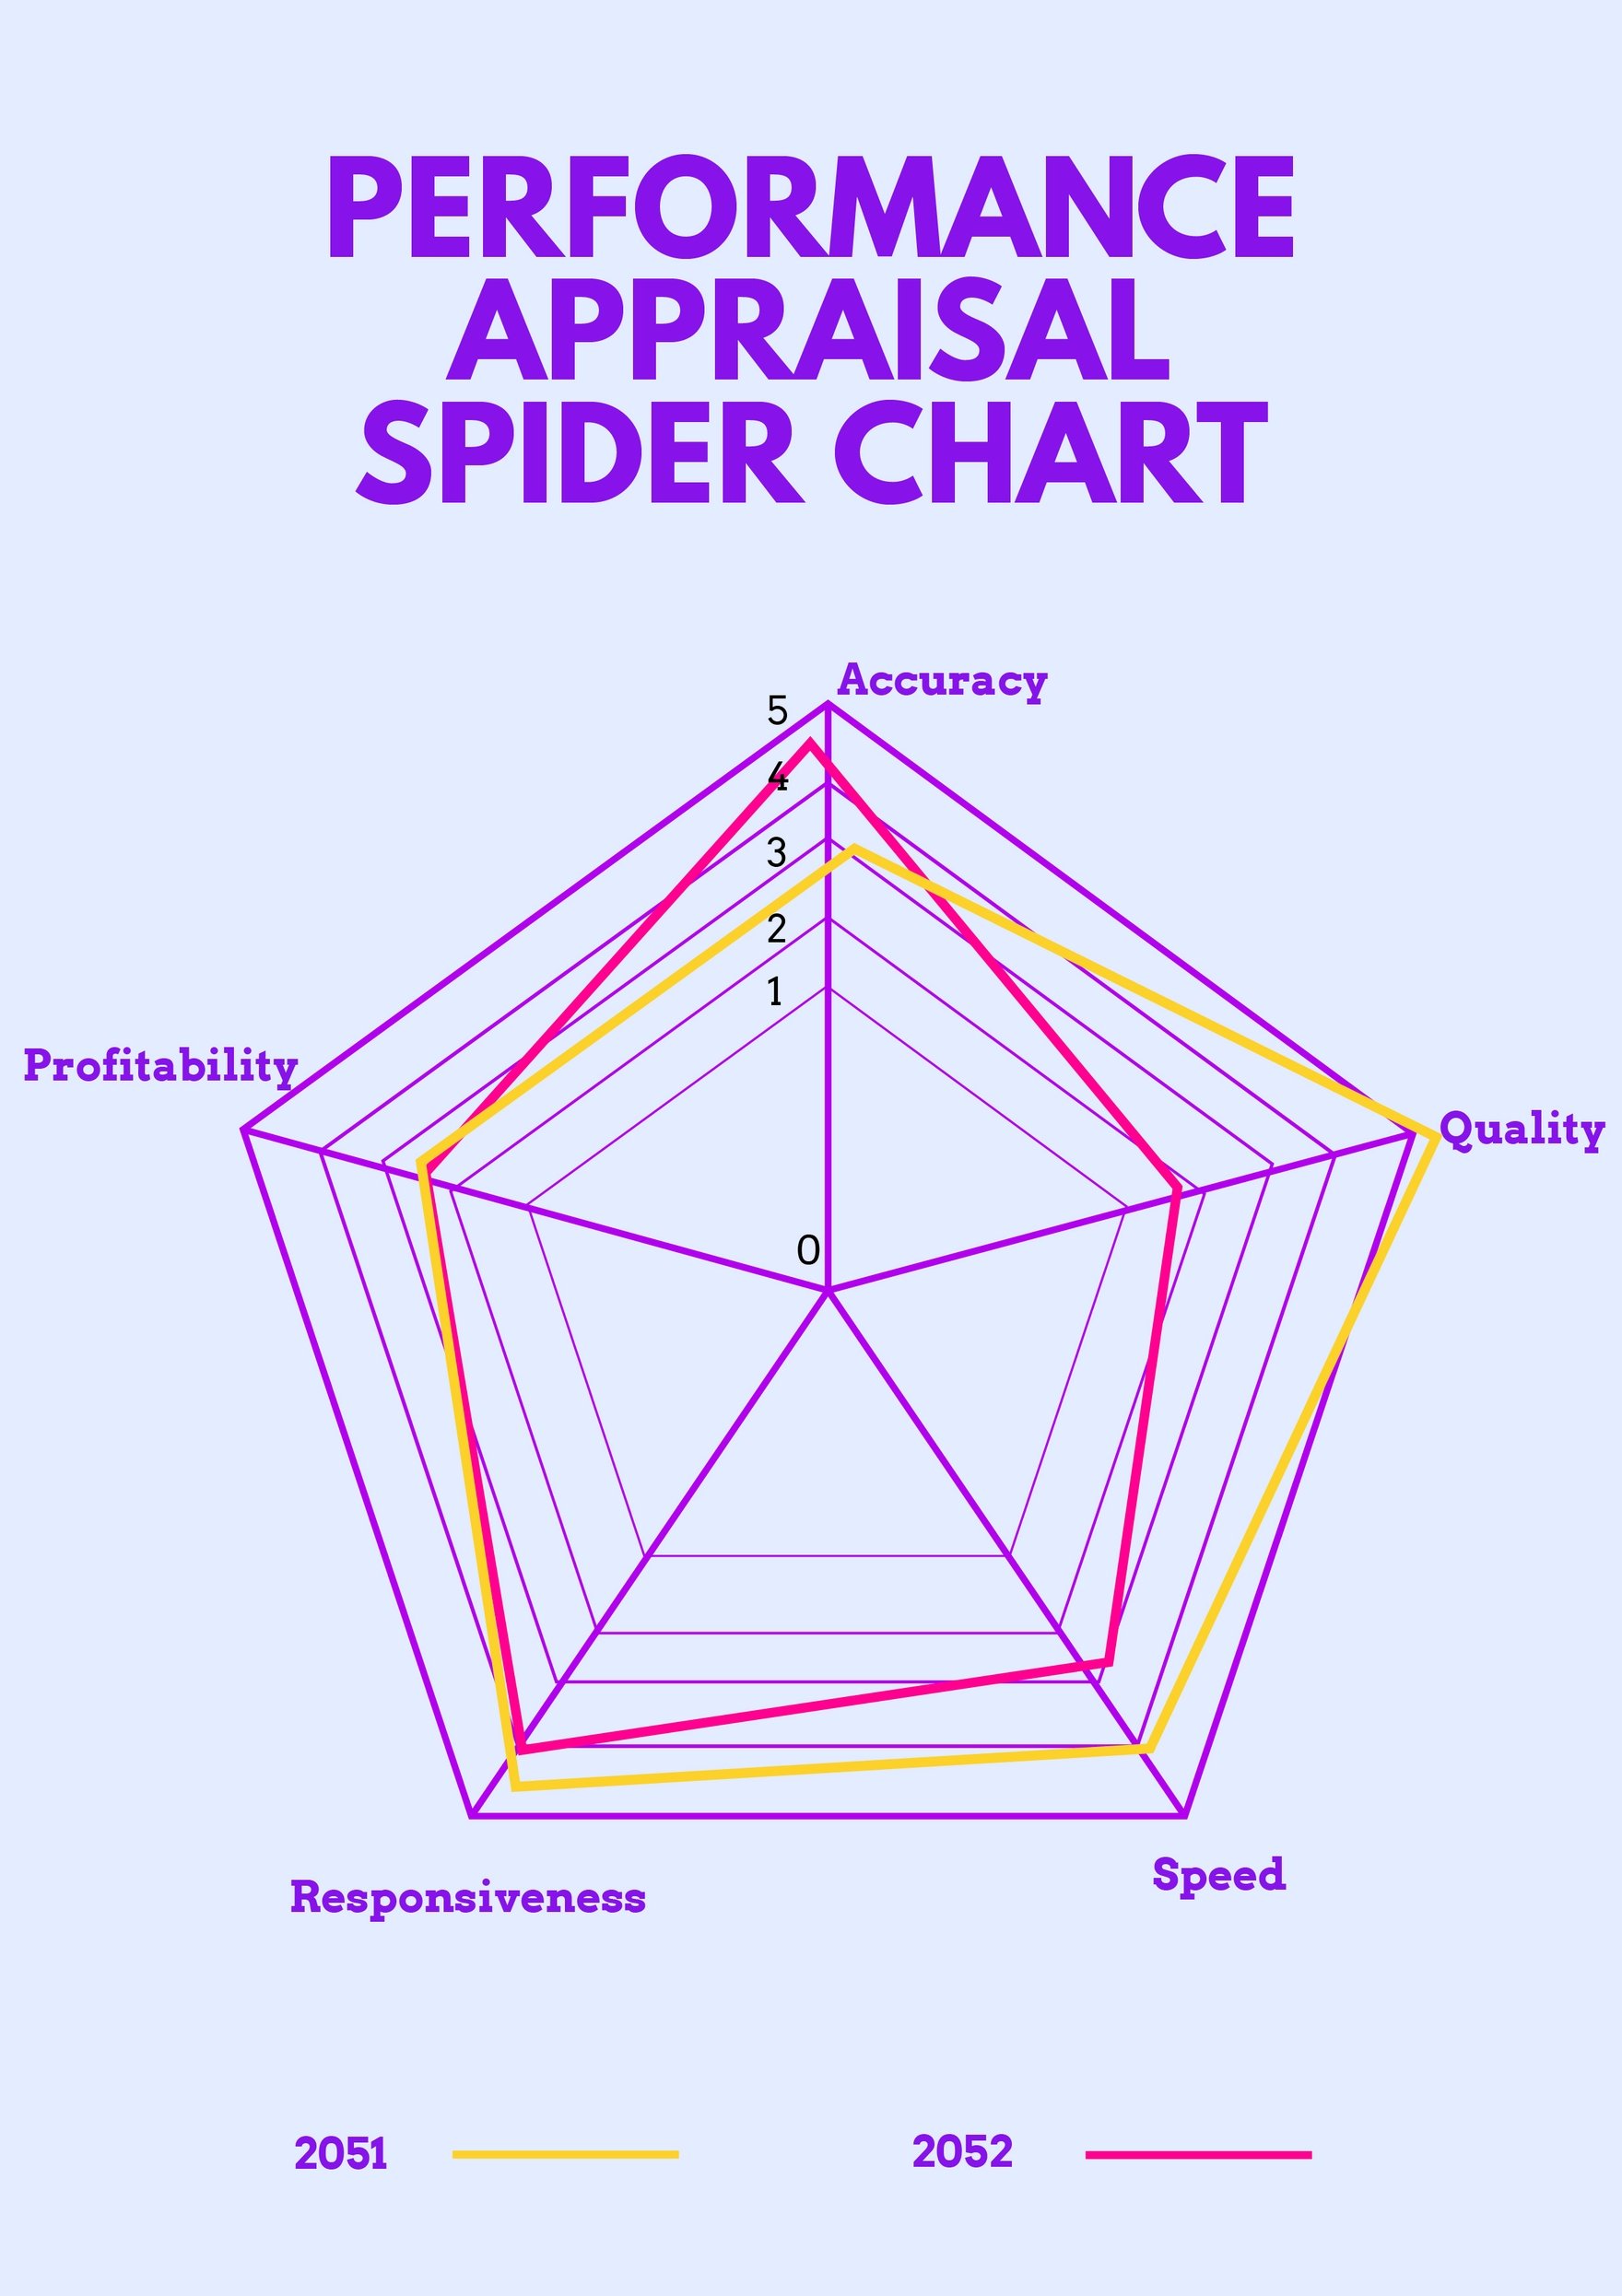 word spider diagram template